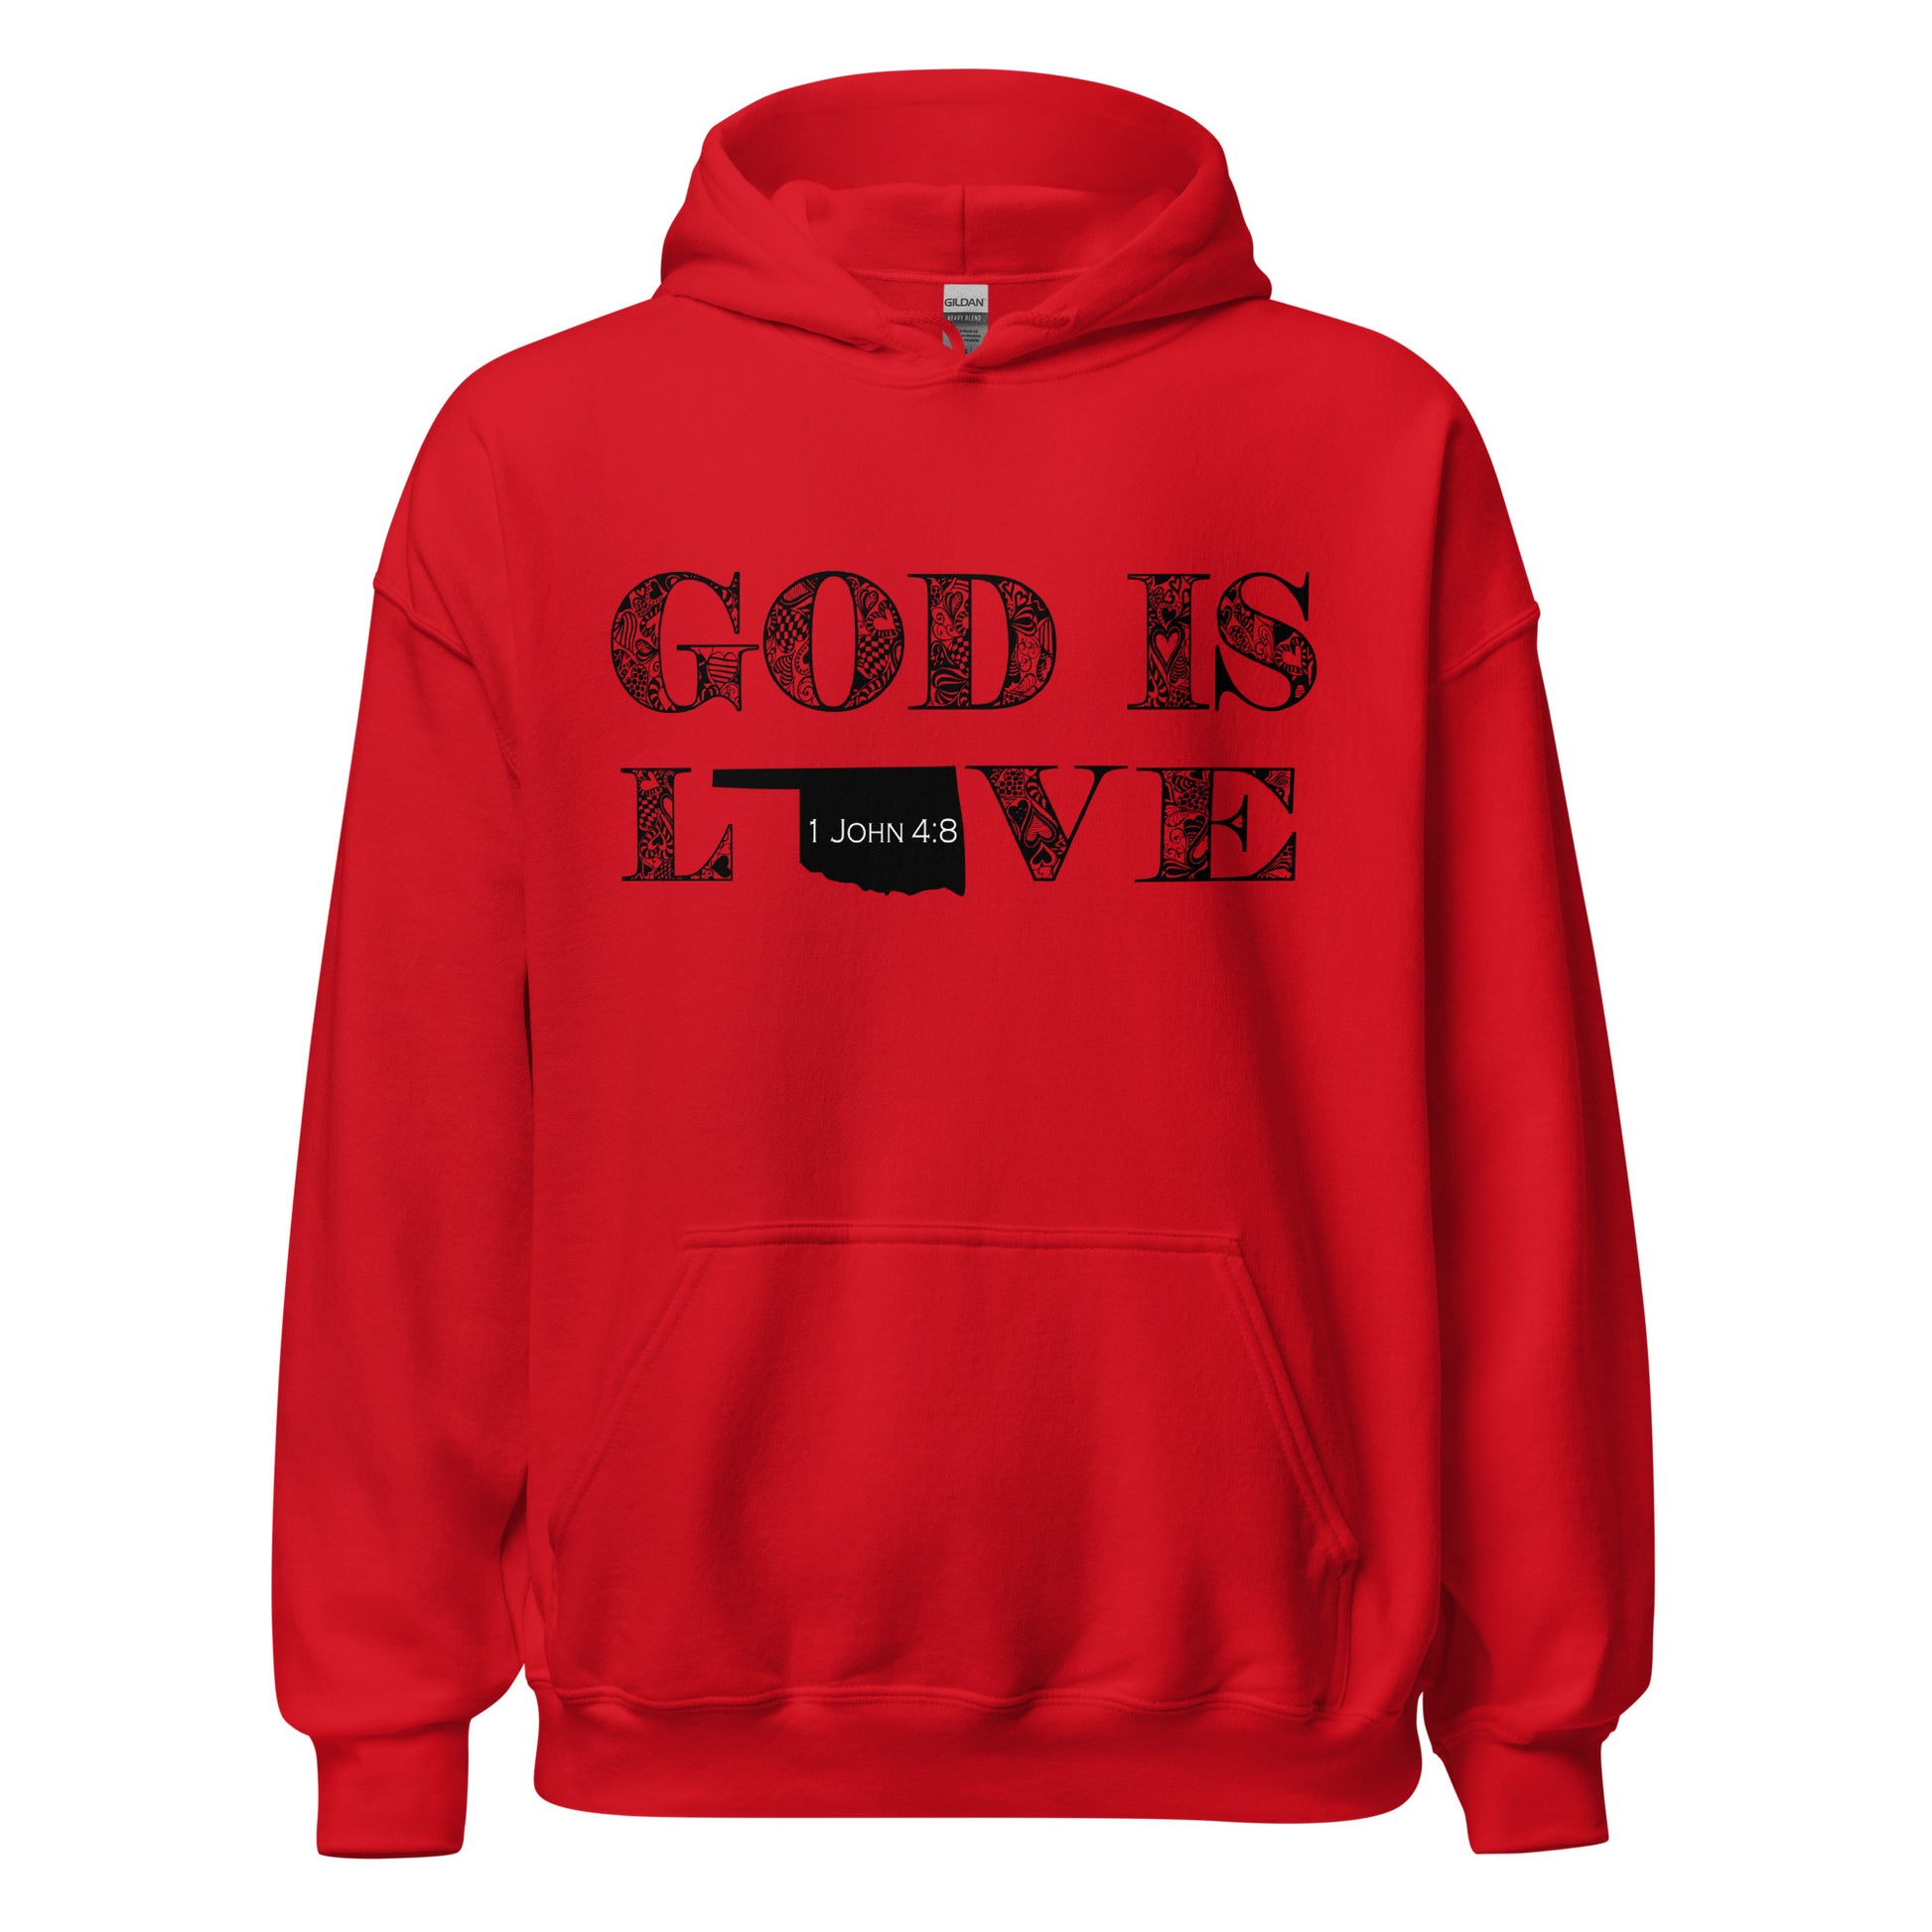 1 John 4:8 God Is Love Unisex Oklahoma Hoodie in Red - front view with hood down